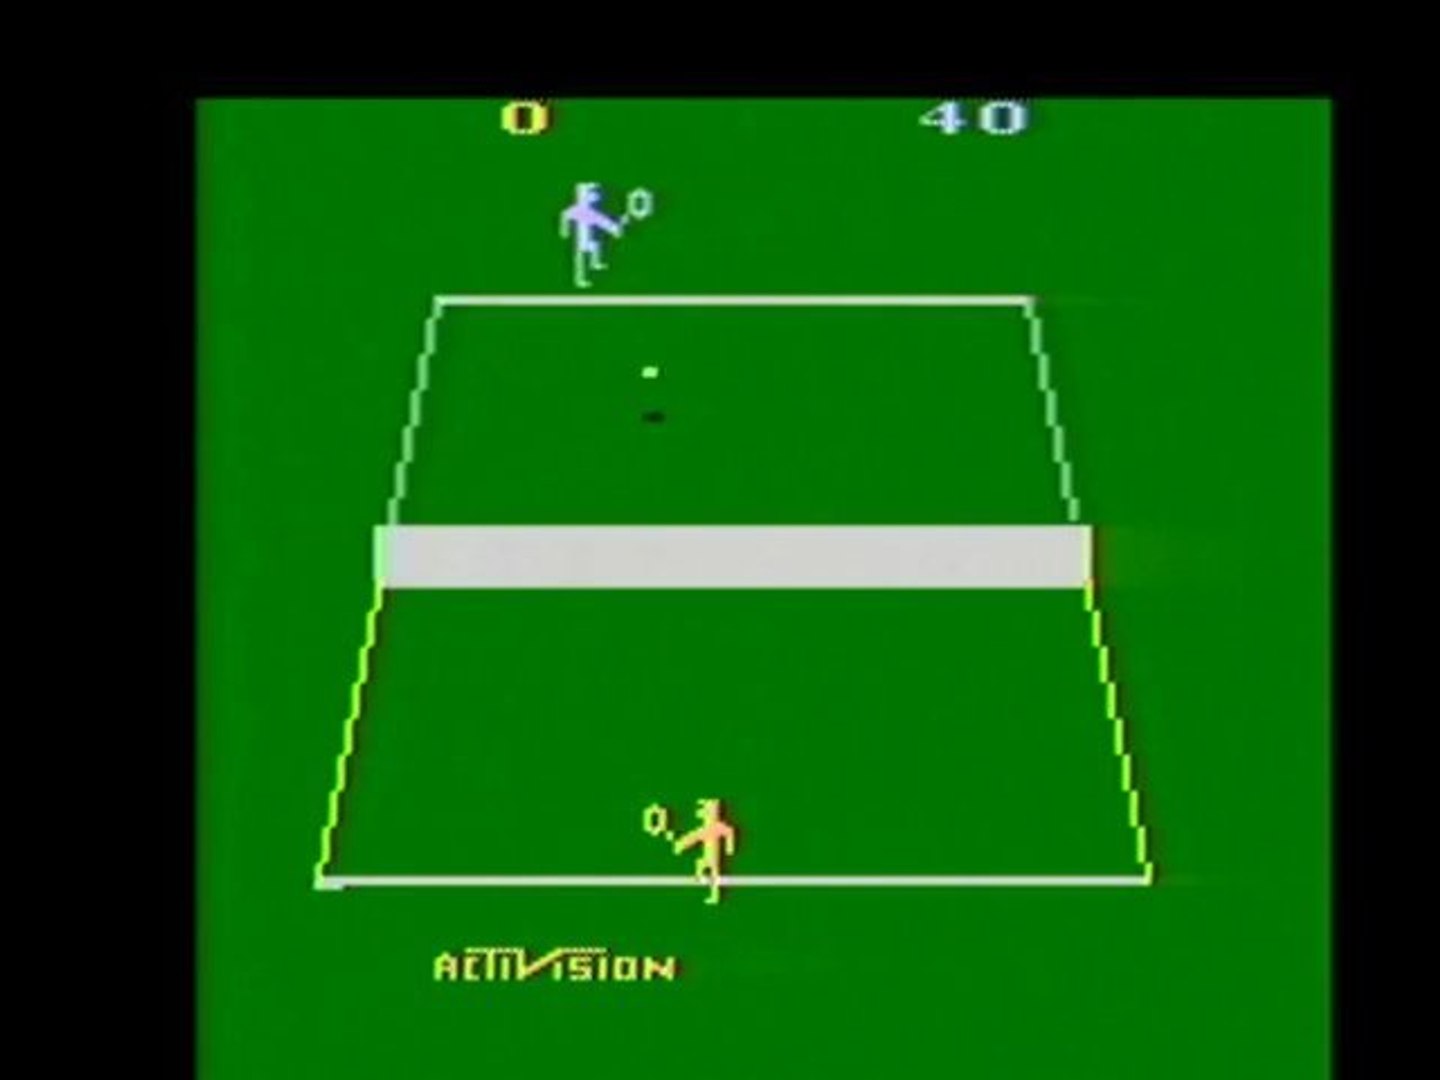 Classic Game Room - TENNIS review for Atari 2600 - video Dailymotion